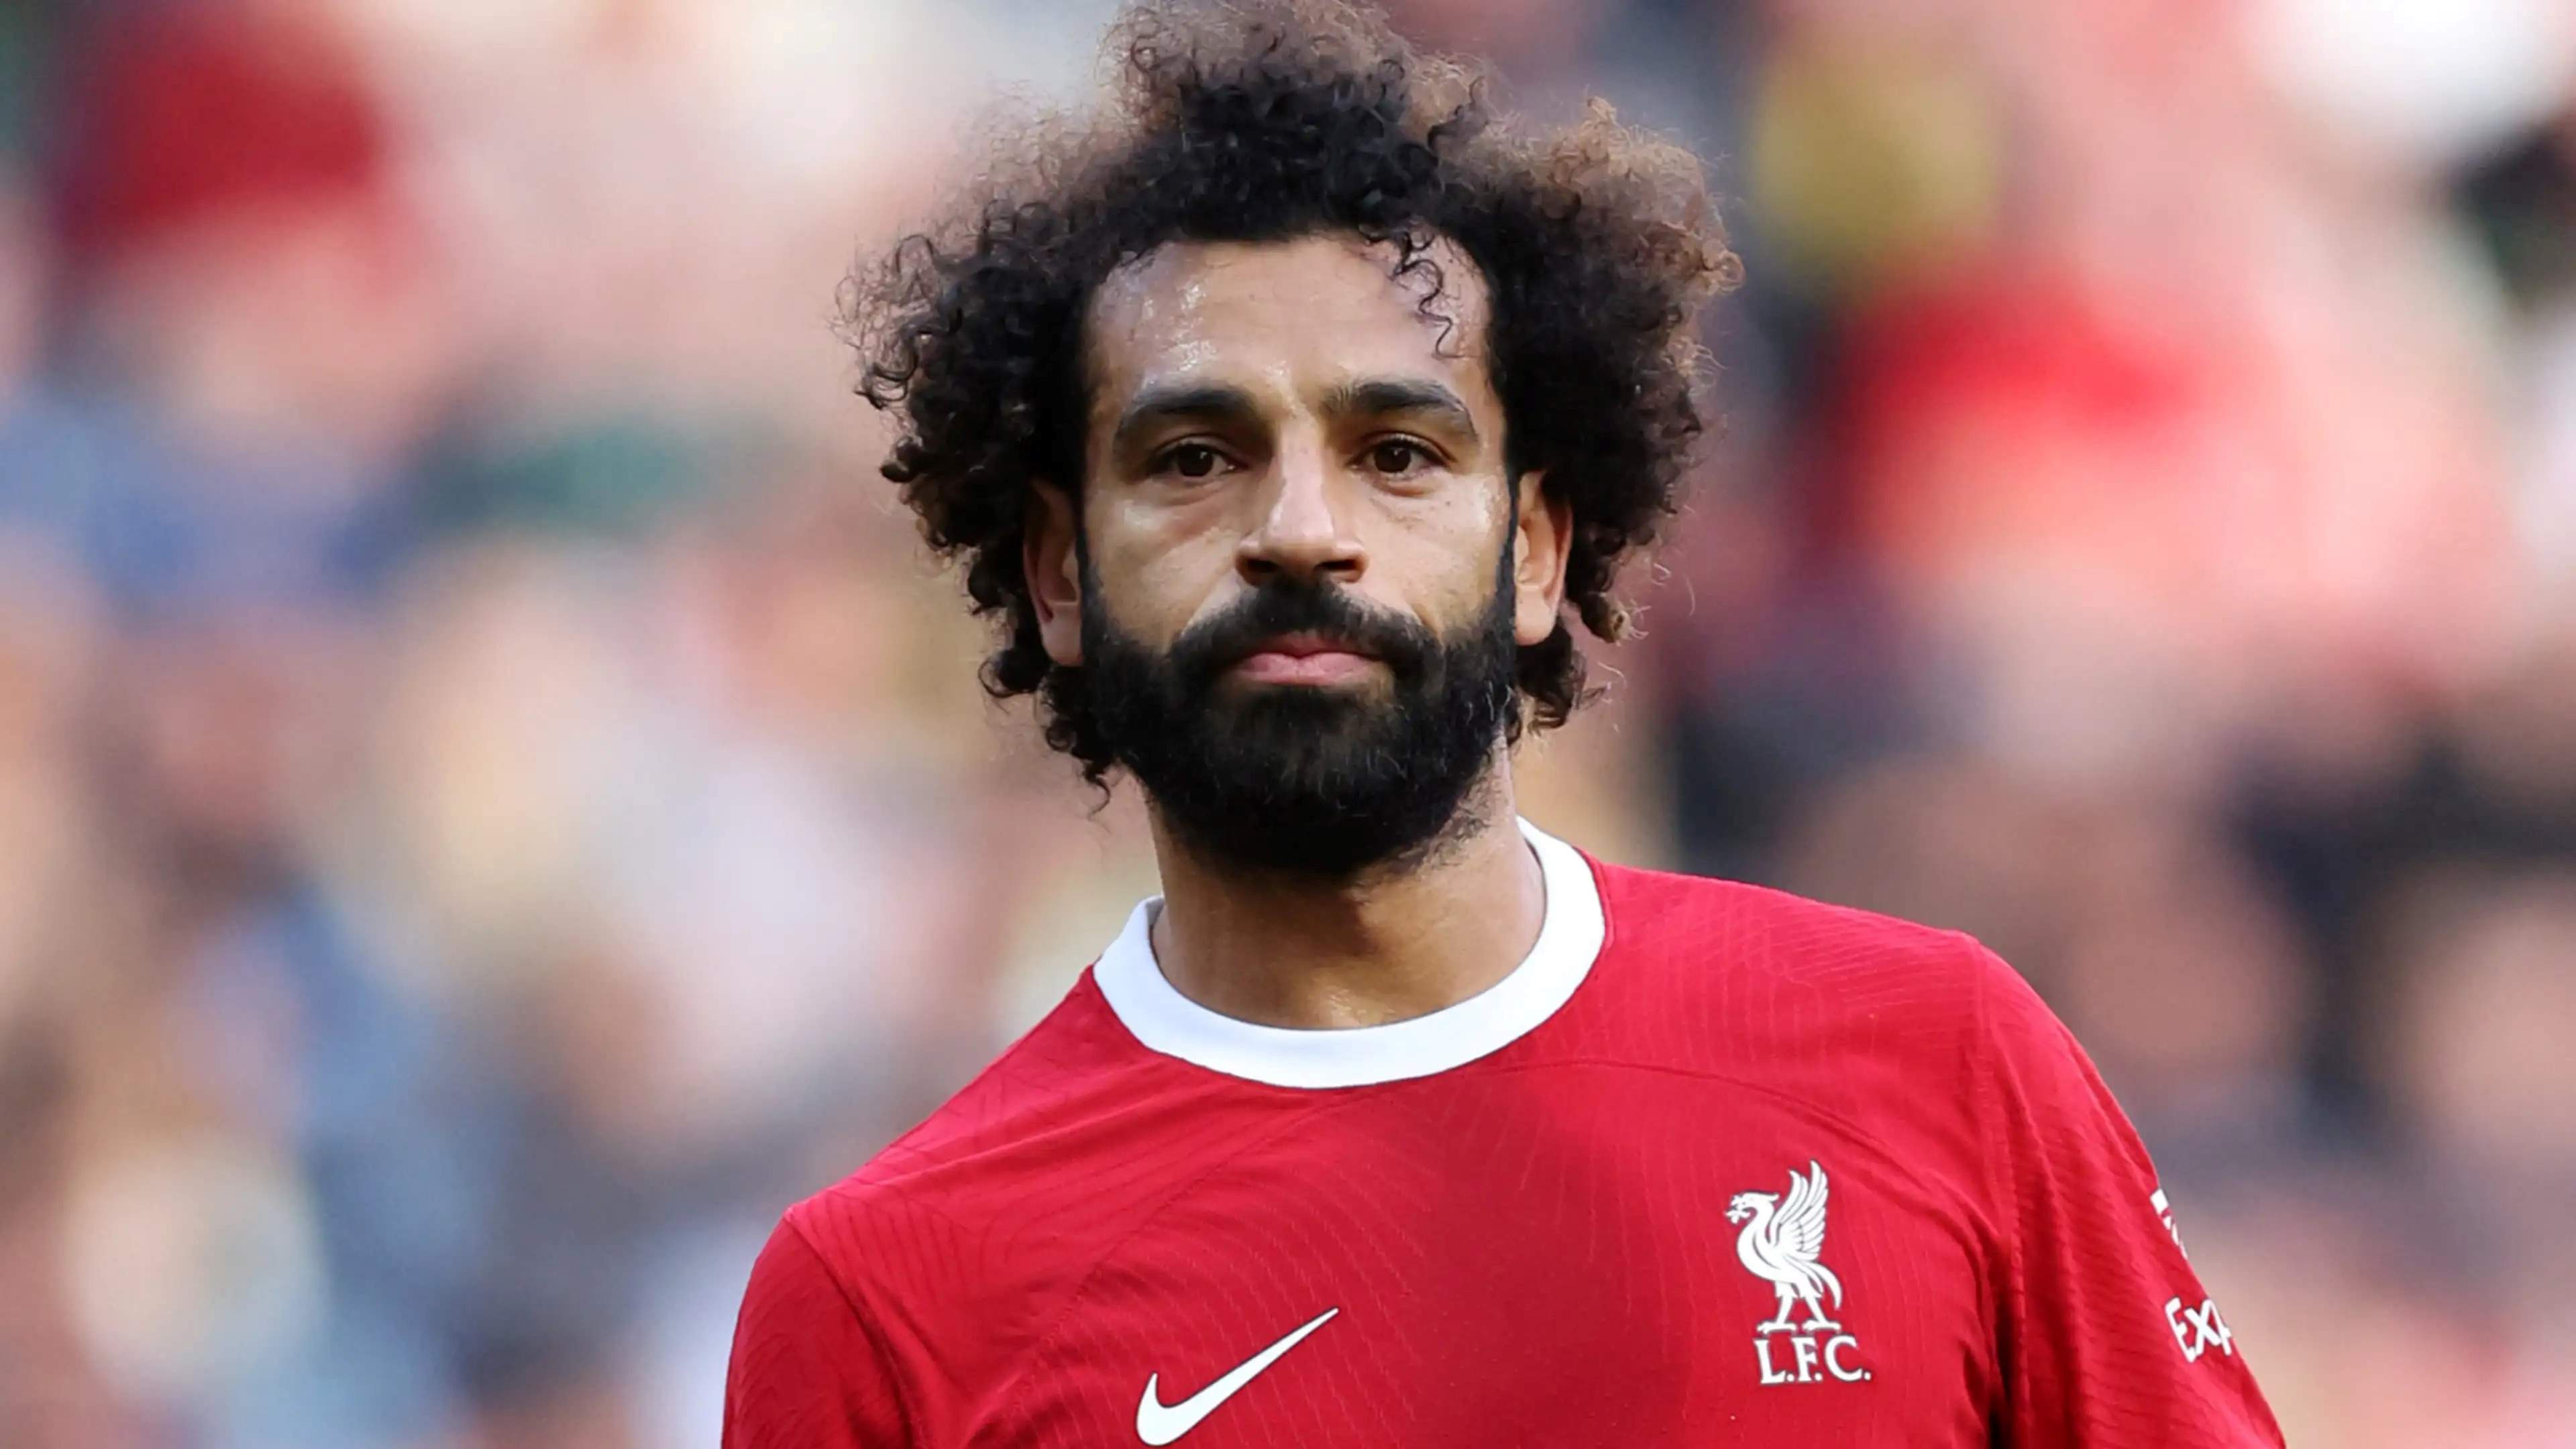 17-astonishing-facts-about-mohamed-salah